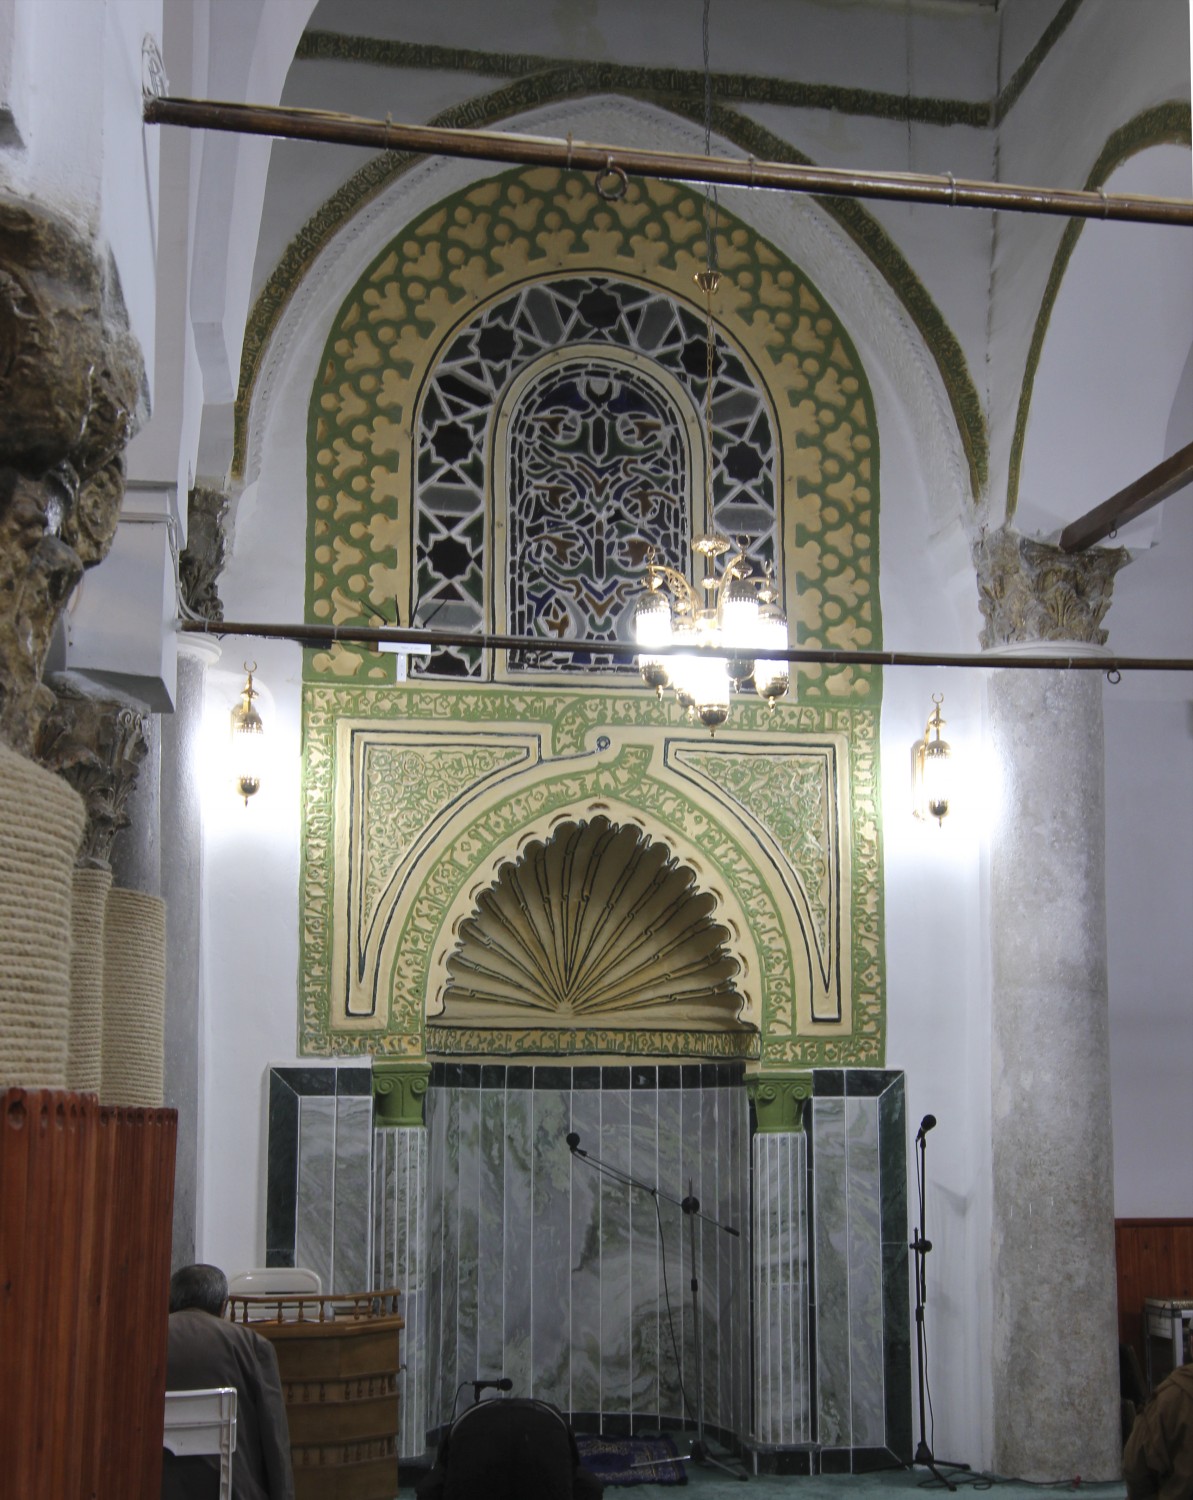 View of the mihrab niche fronted by a pointed arch, with fluted half-dome visible at the bottom